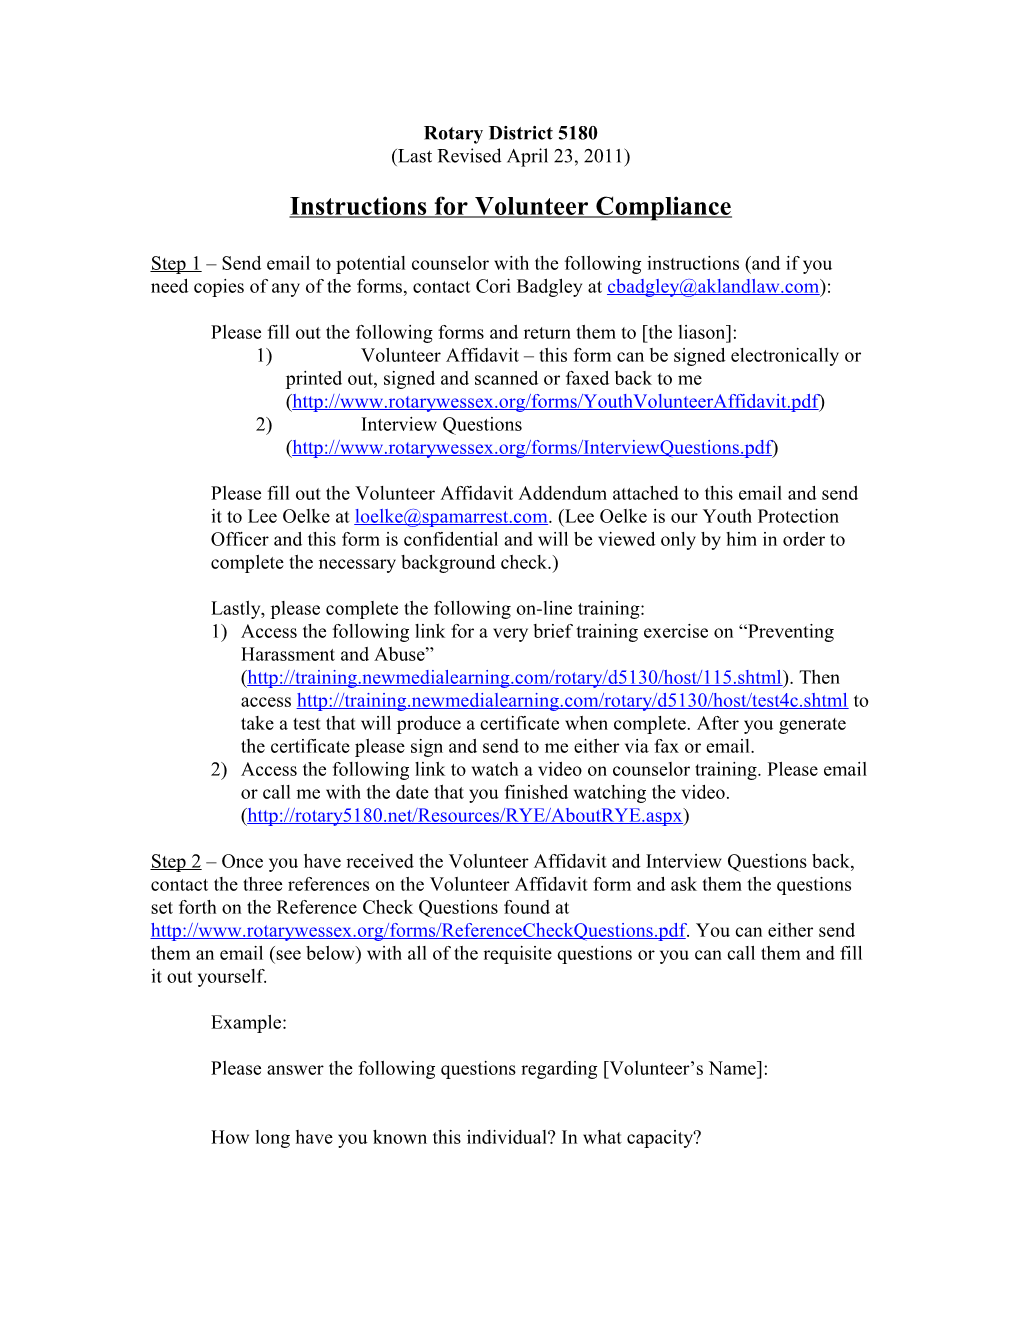 Instructions for Volunteer Compliance